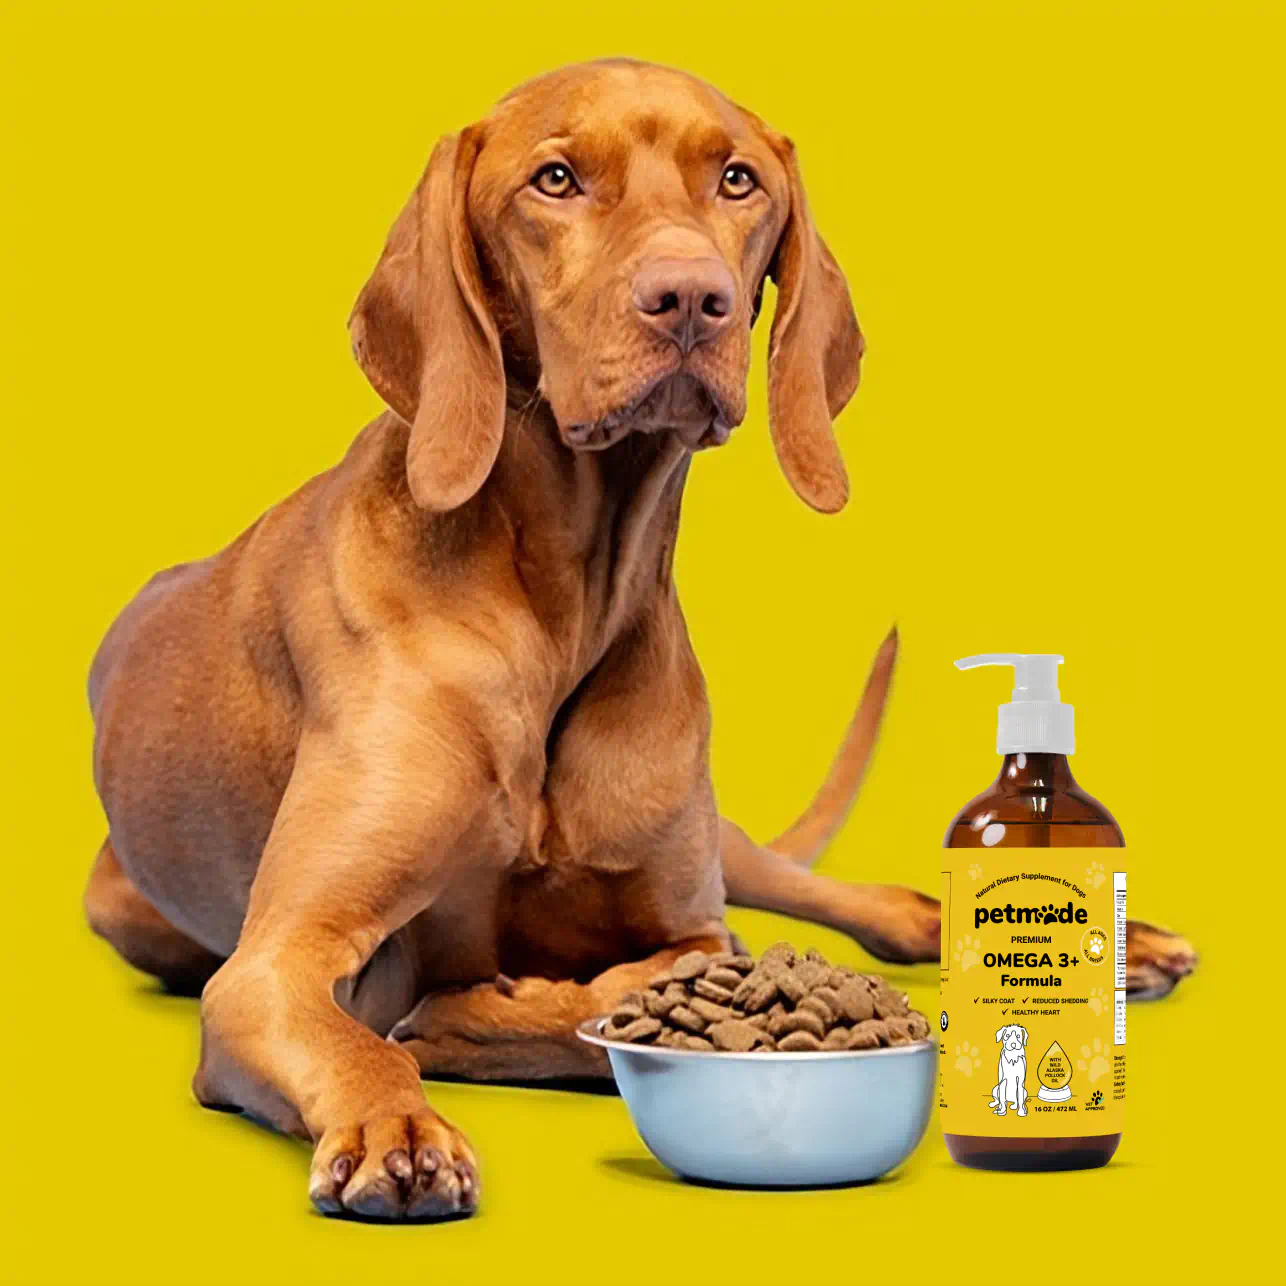 A brown dog sitting beside a bowl full of kibble and a bottle of Omega 3+